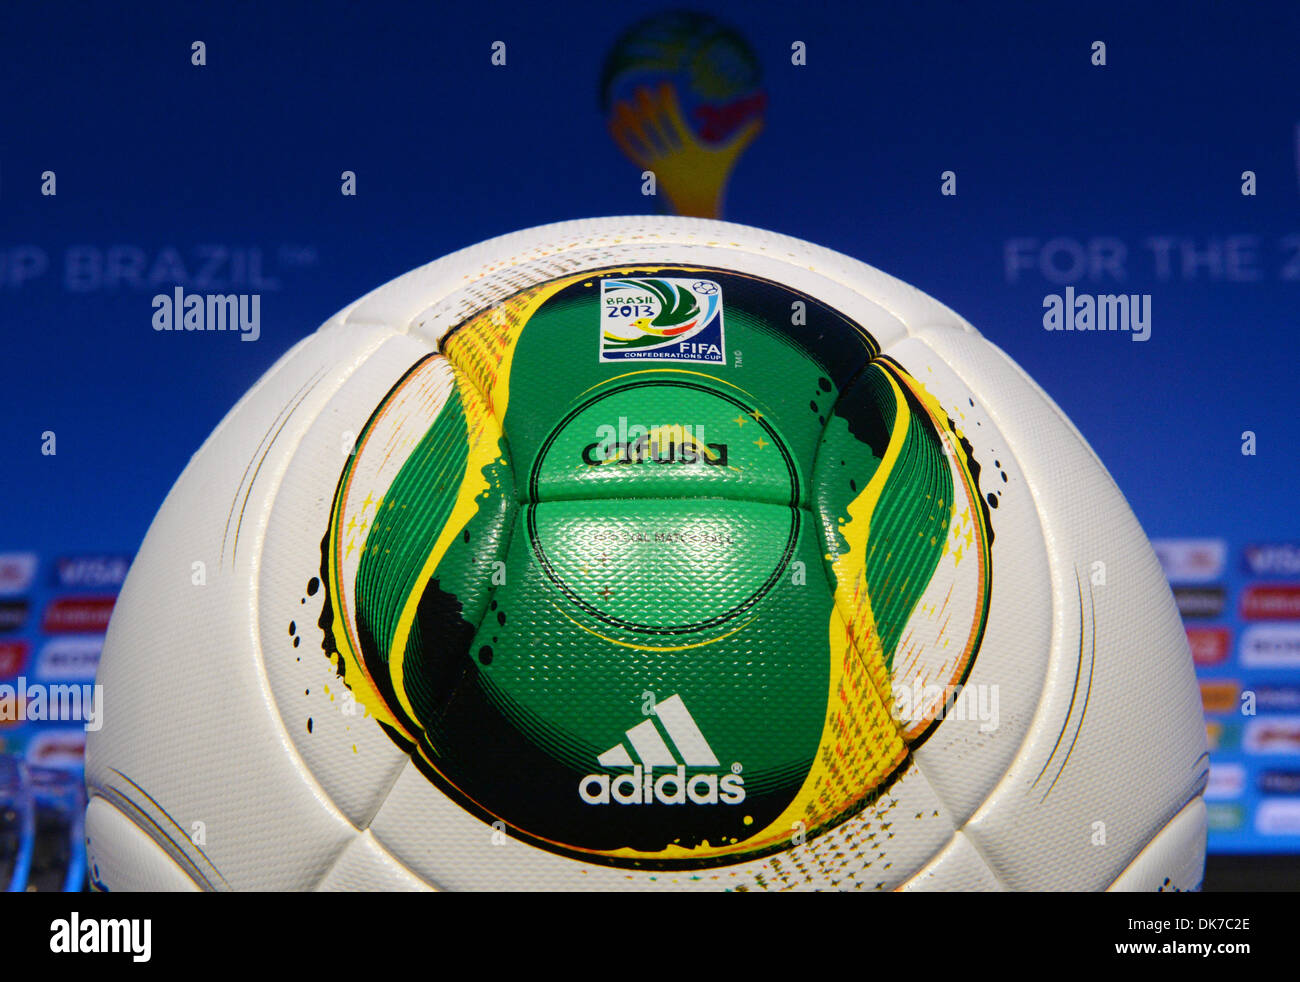 Costa do Sauipe, Brazil. 03rd Dec, 2013. The official match ball of the 2013 FIFA confederations cup is seen in Costa do Sauipe, Brazil, 03 December 2013. The final draw for the preliminary round groups of the 2014 FIFA world cup Brazil will be held on 06 December 2013. Photo: Marcus Brandt/dpa/Alamy Live News Stock Photo